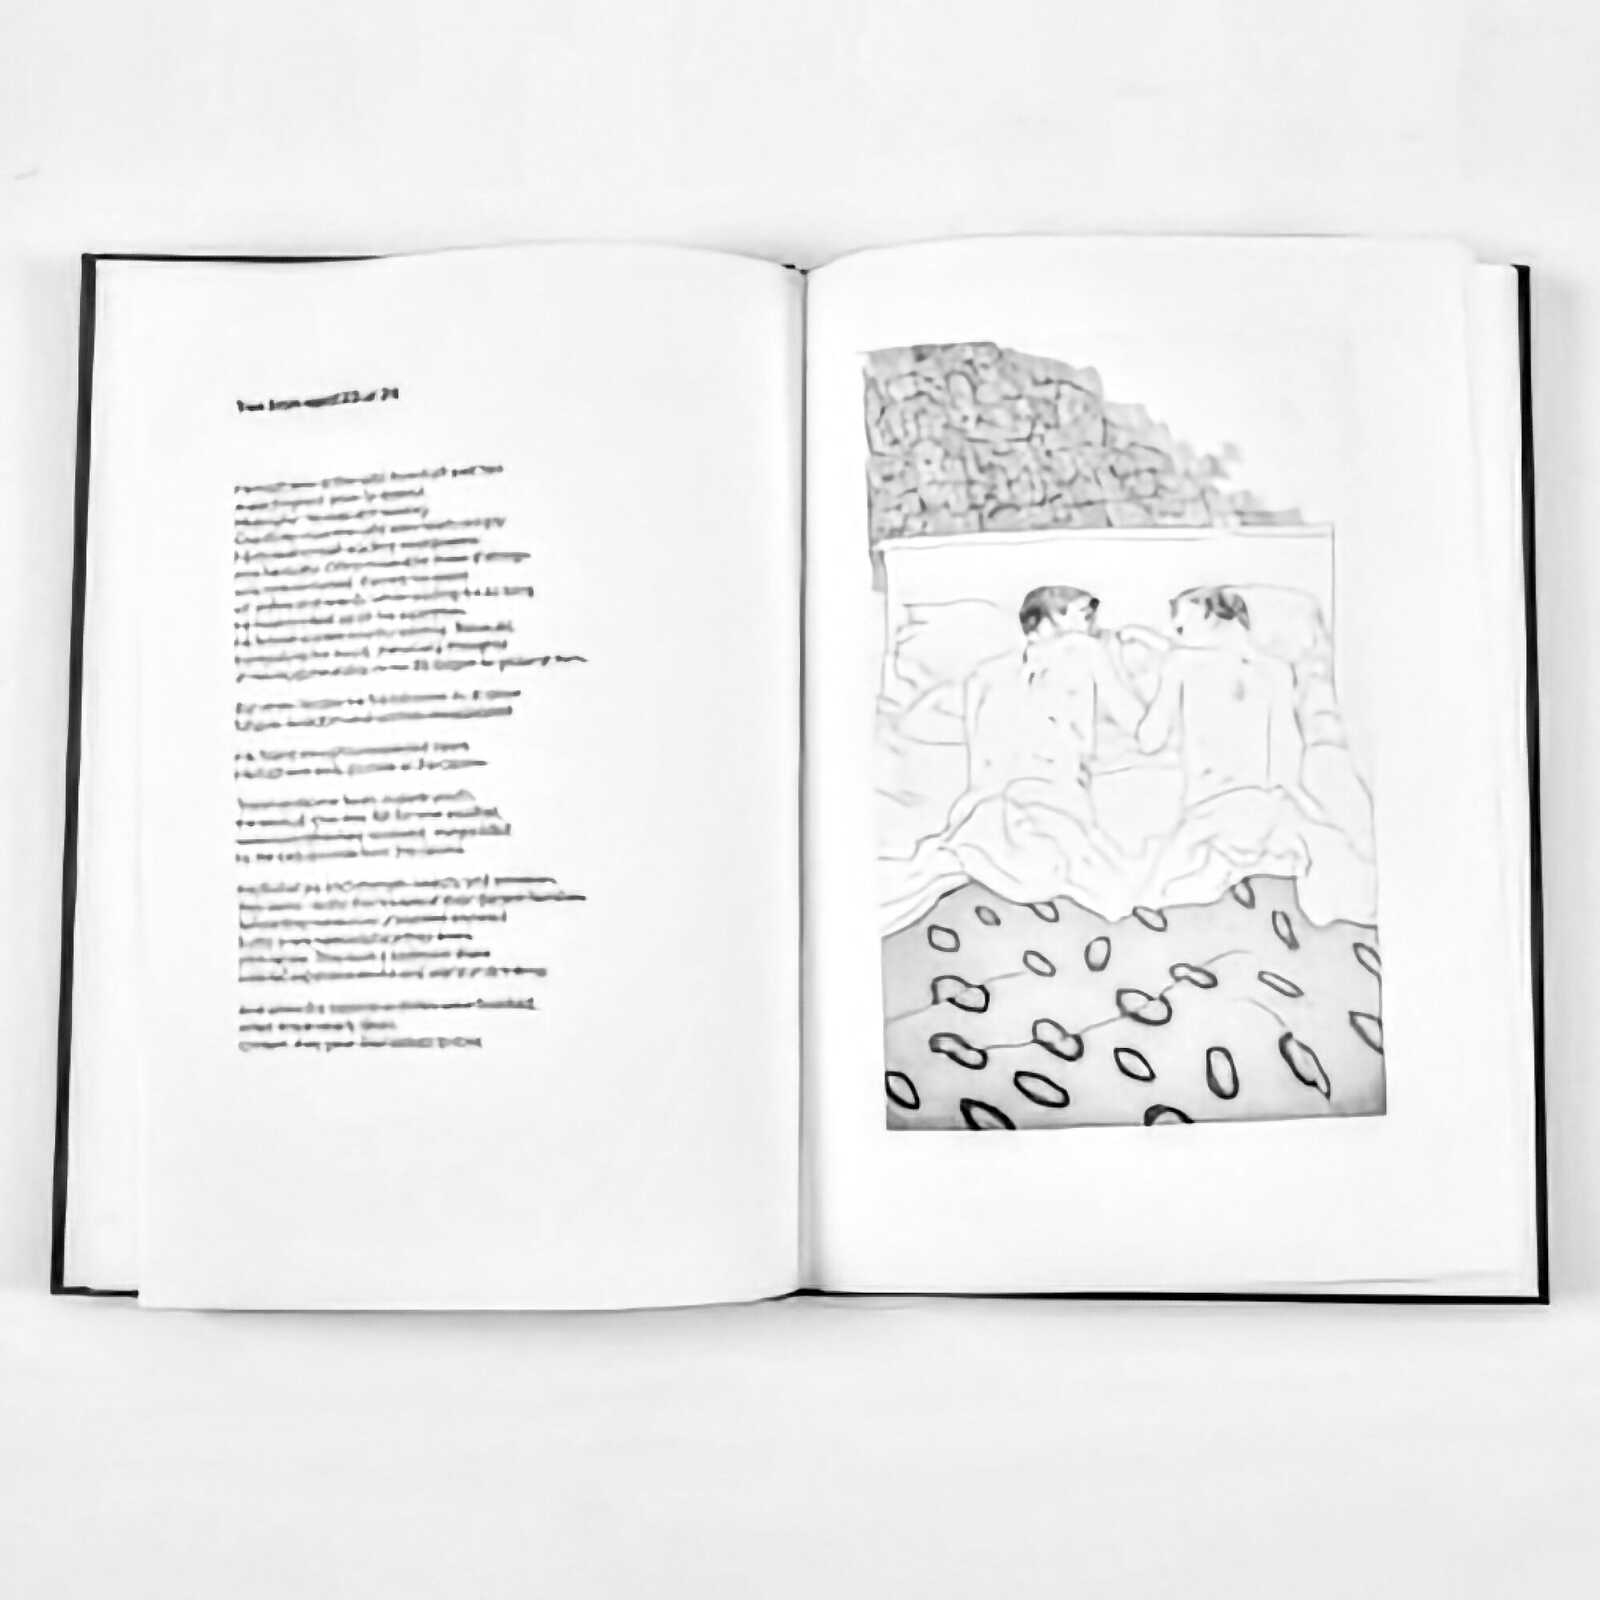 David Hockney | Fourteen poems by C P Cavafy (1967) | Available for ...